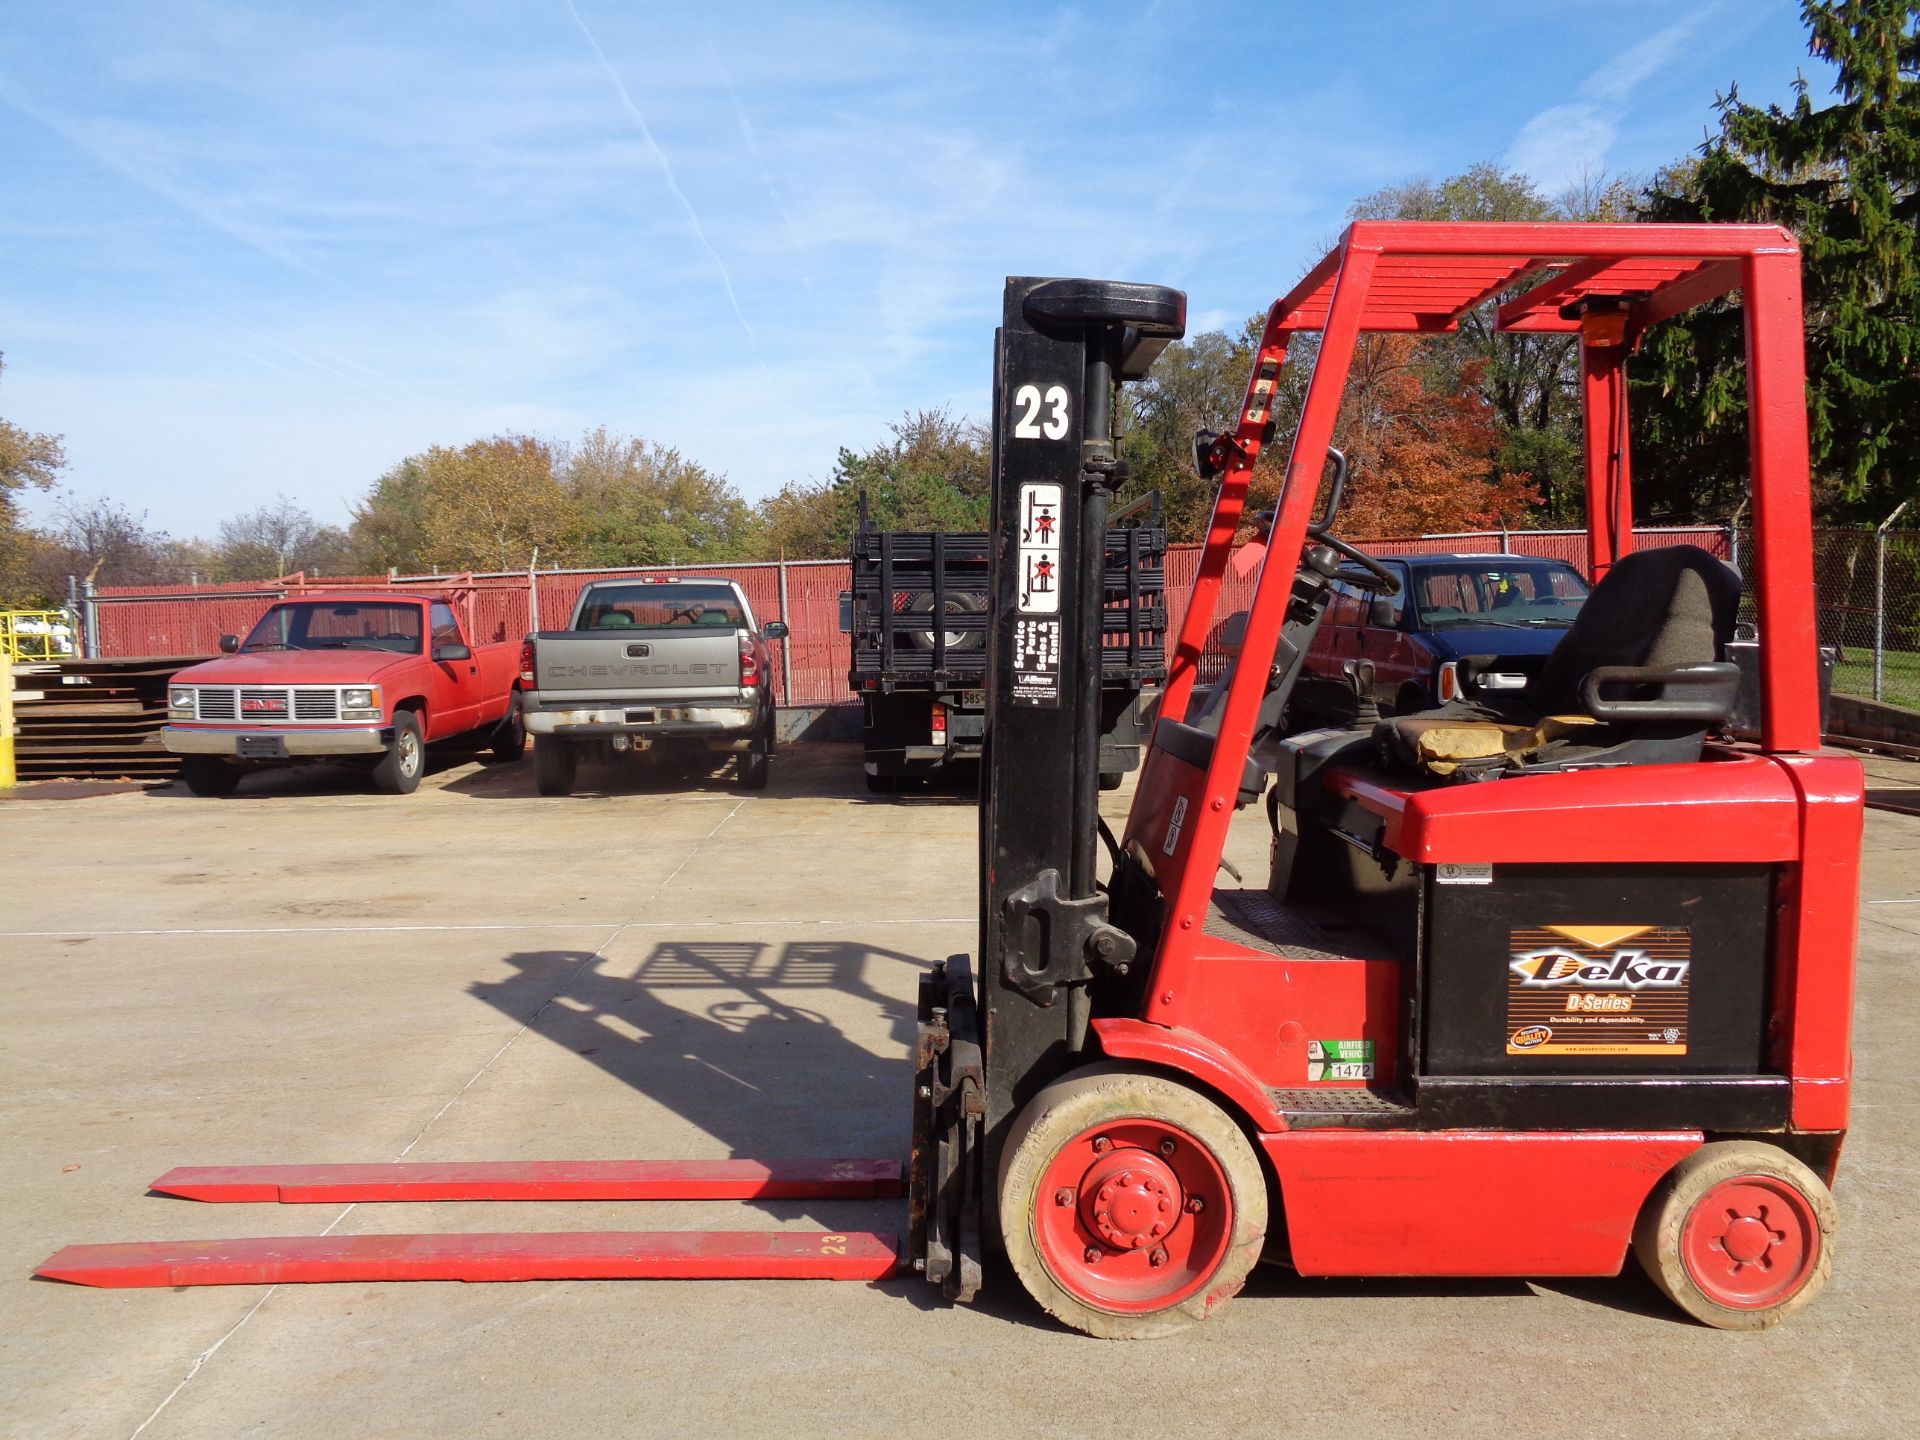 1999 Hyster E50XM-27 Forklift - 5,000 lbs